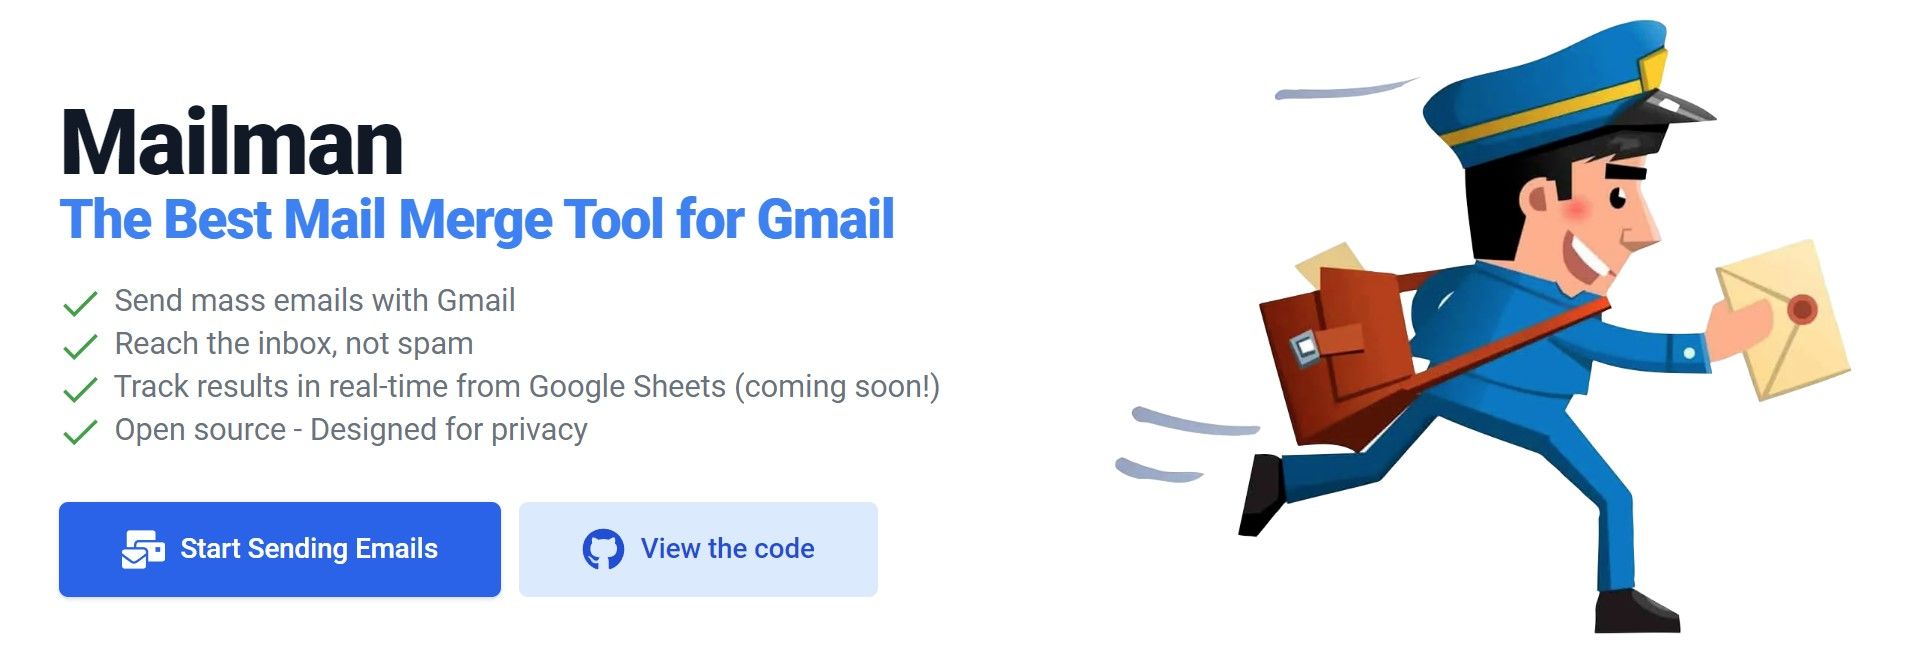 Mailman: The best mail merge tool for Gmail sign-up page